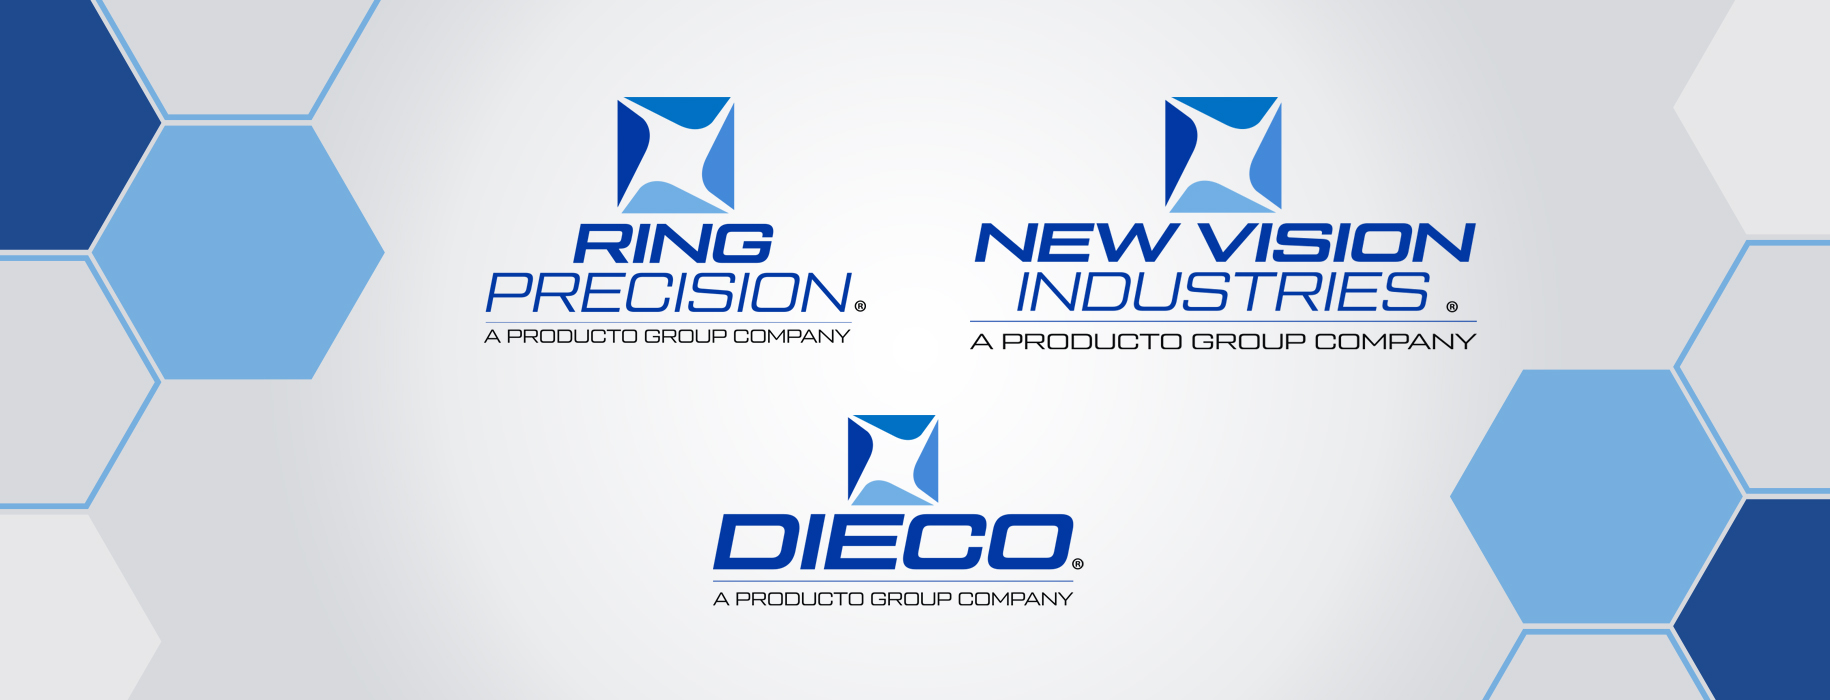 Ring, Dieco, New Vision Industries